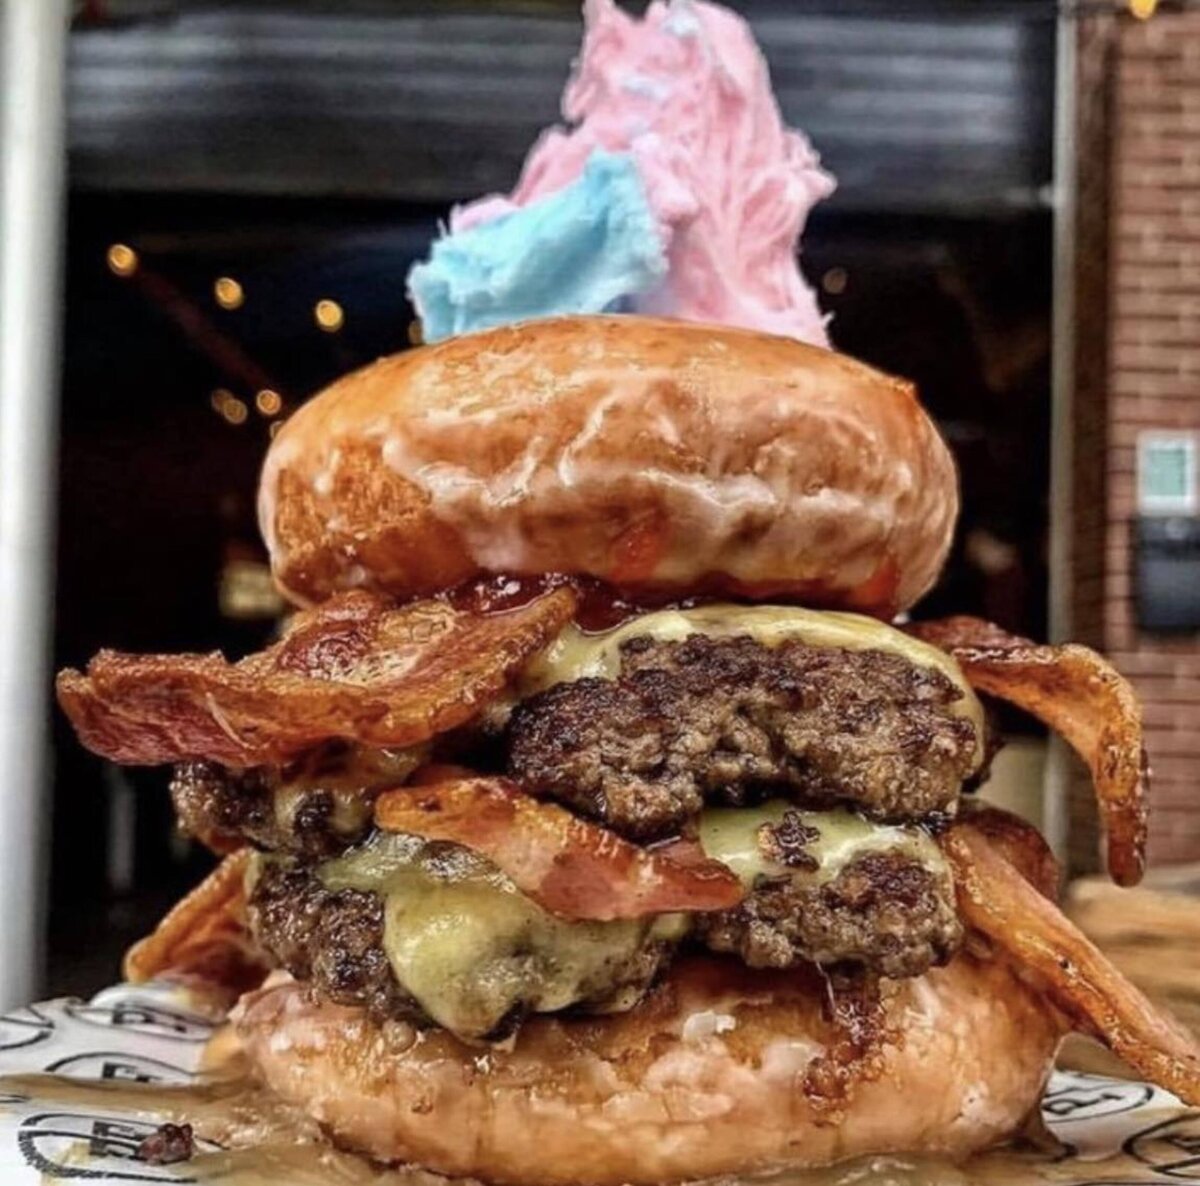 A beef burger with donut bun, bacon , cheese and double patty filling with candy floss on top